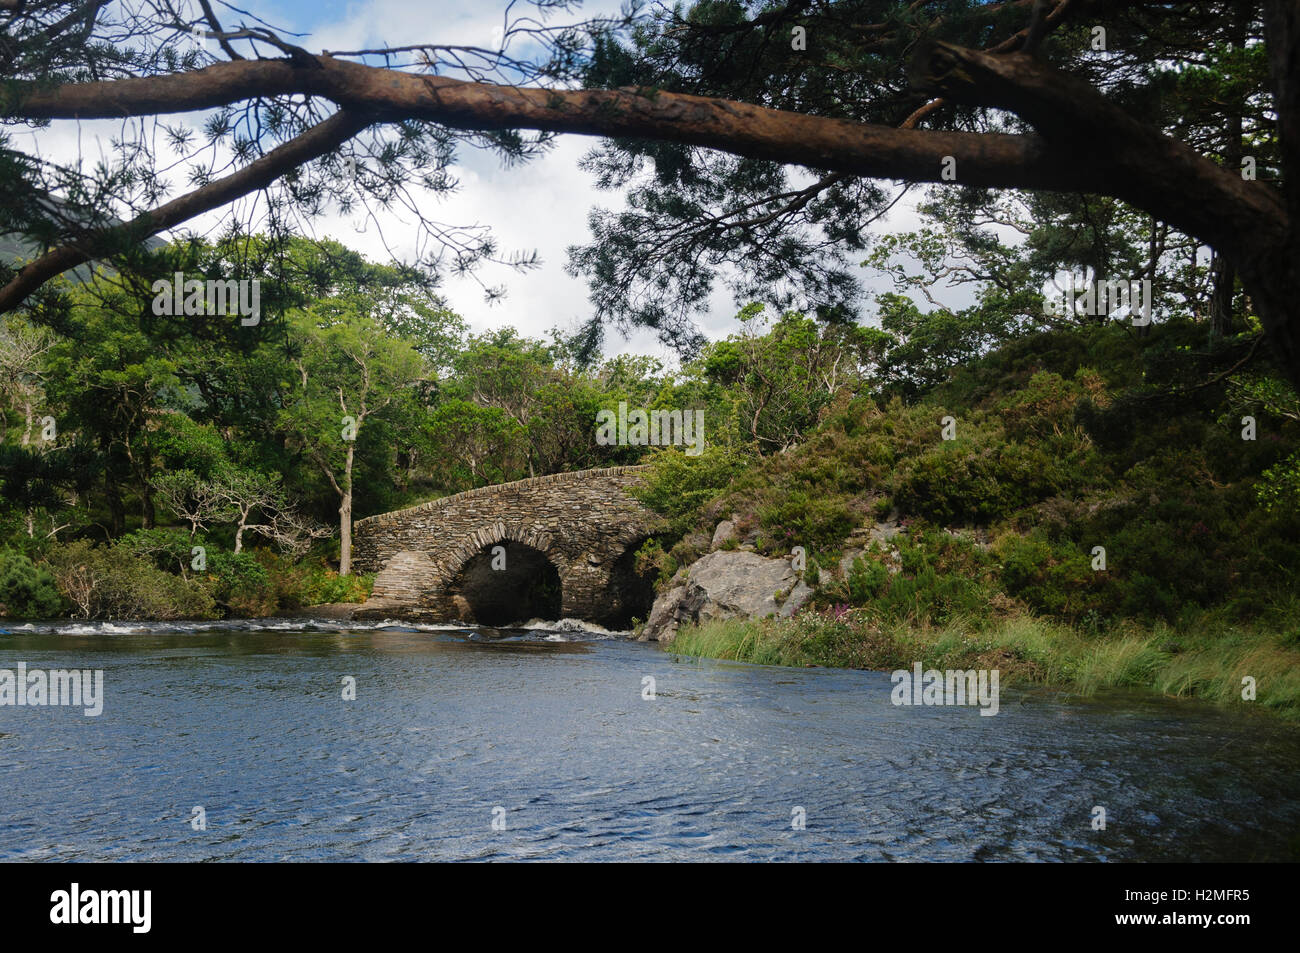 Meeting of the water: a stone bridge between Lough Leane (Lower Lake) and Upper Lake in Killarney National Park, Ireland, Europe Stock Photo